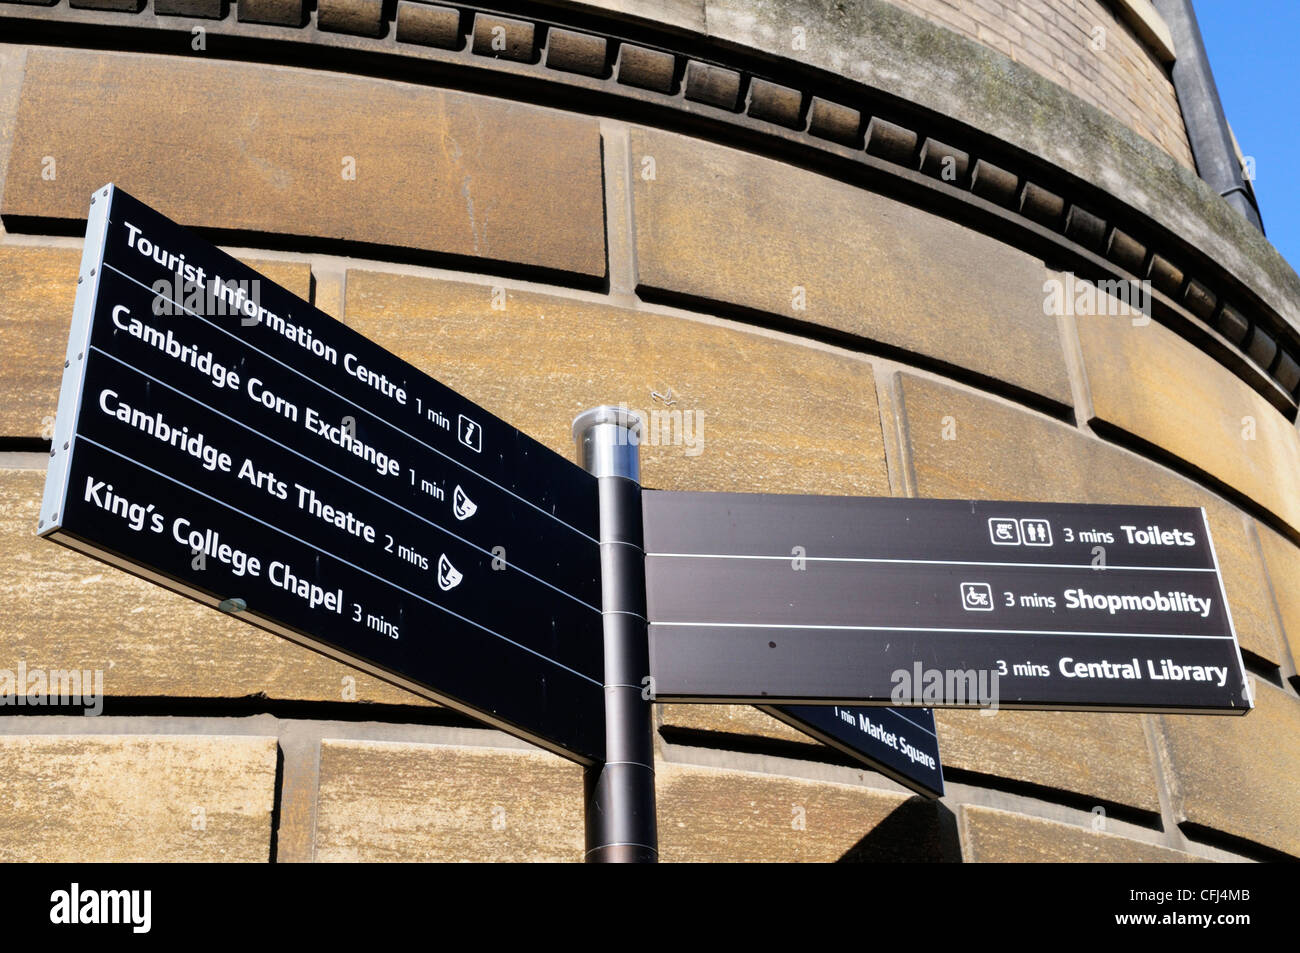 Signpost to Tourist Attractions and Facilities, Cambridge, England, UK Stock Photo